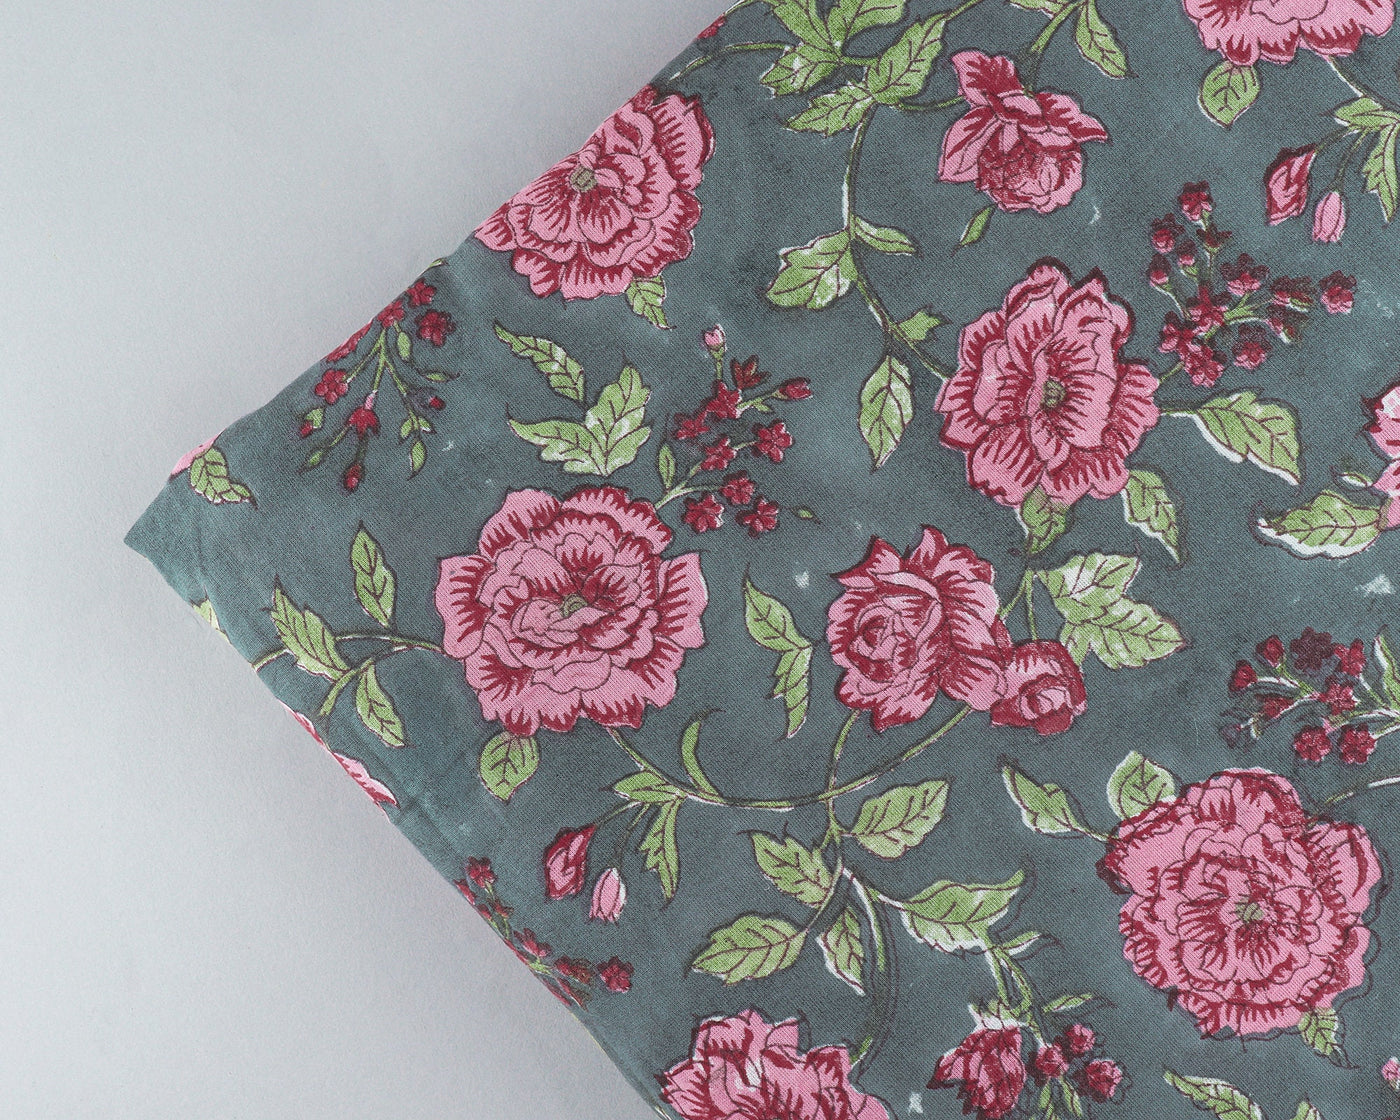 Mink Gray, Brick Pink, Pear Green Indian Floral Hand Block Printed 100% Pure Cotton Cloth, Fabric by the yard, Women's Clothing Curtains Bag